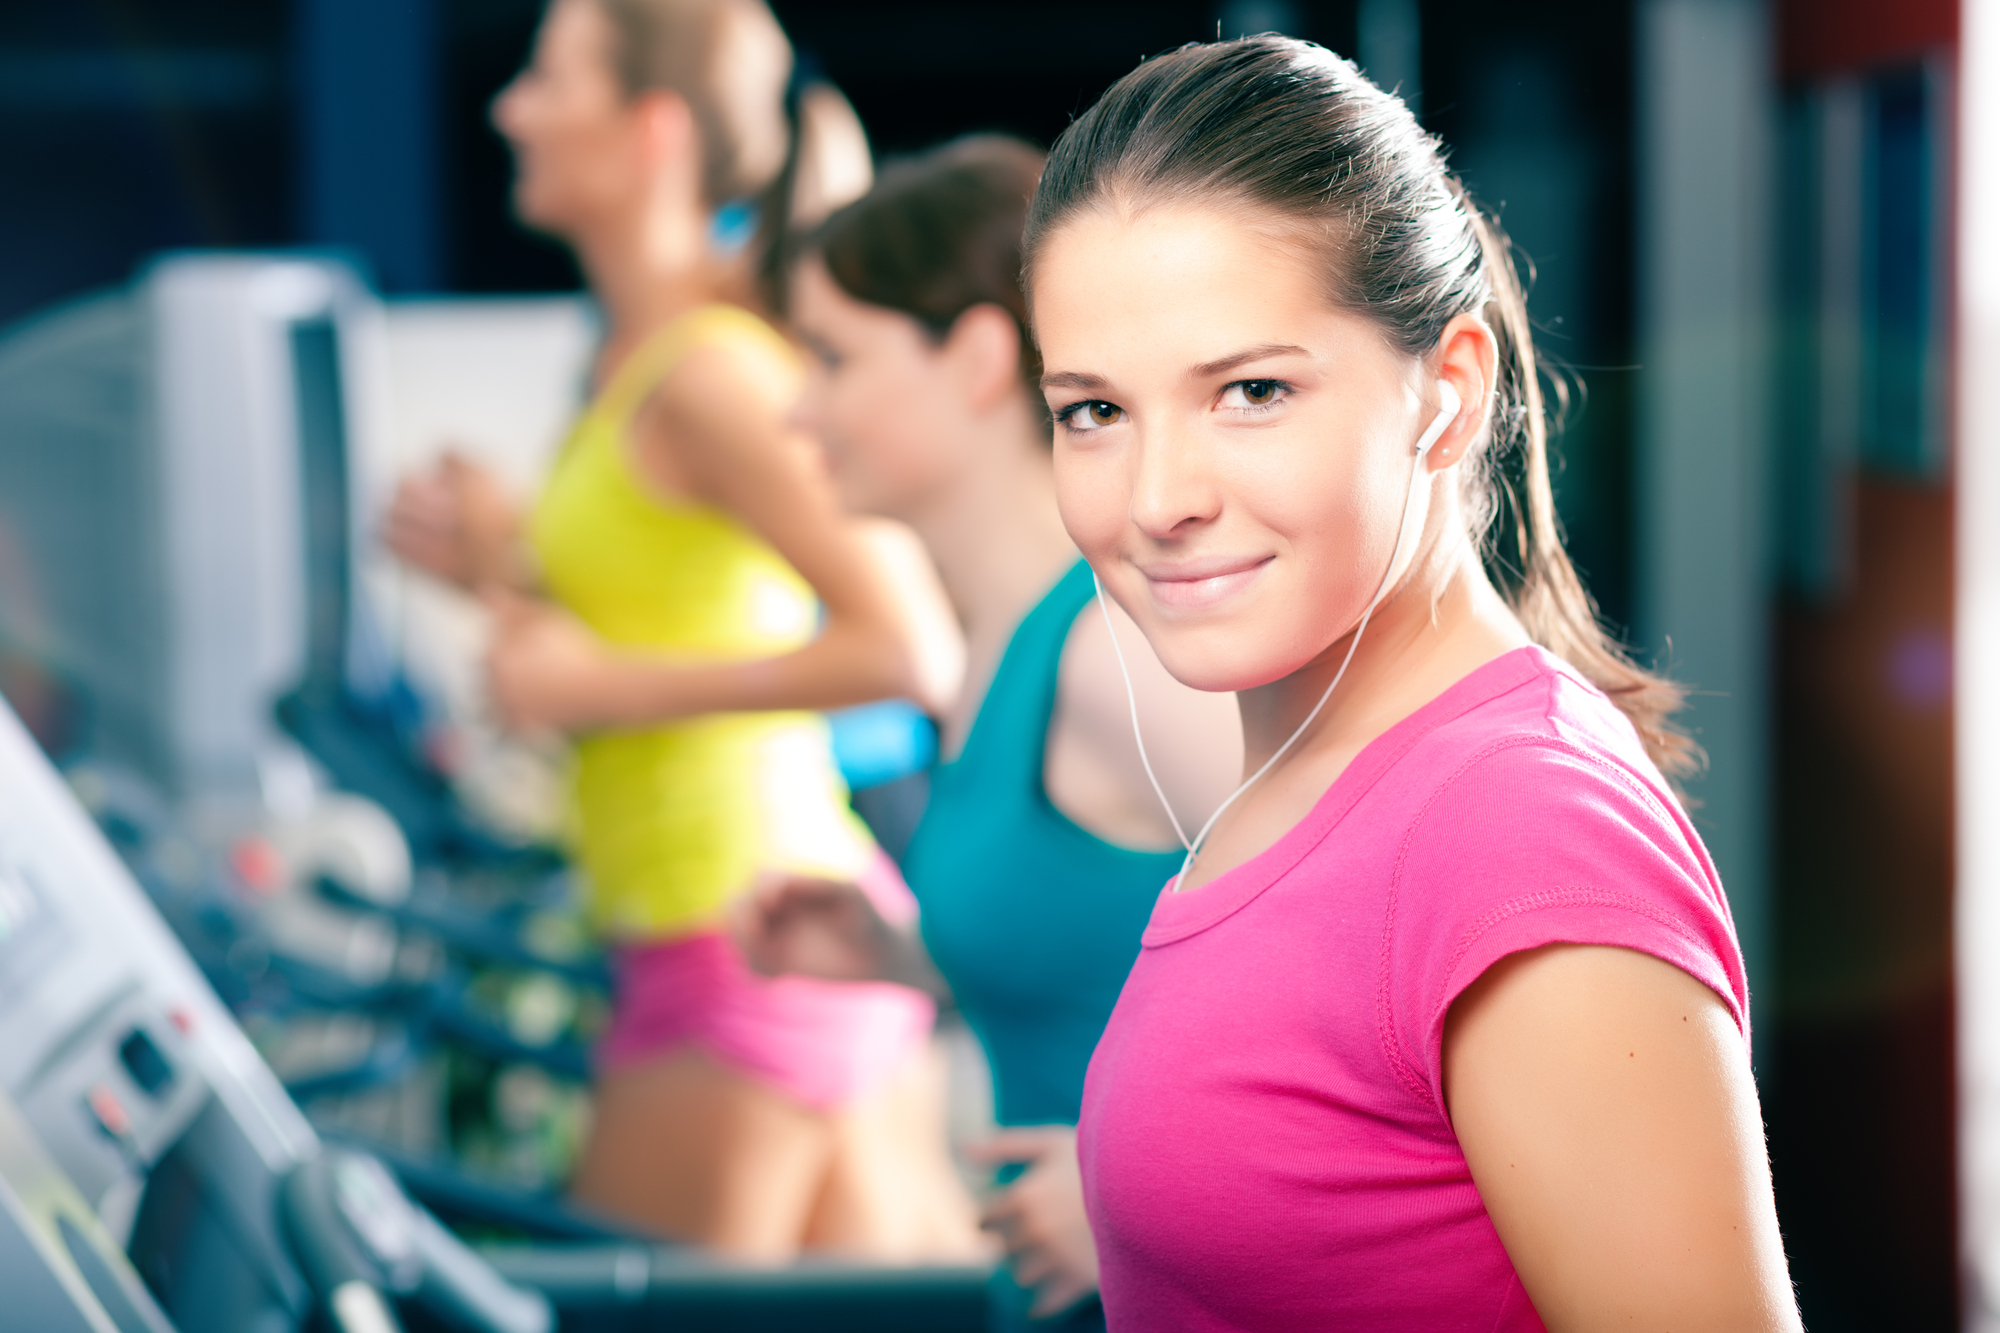 Running on treadmill in gym - group of women exercising to gain more fitness